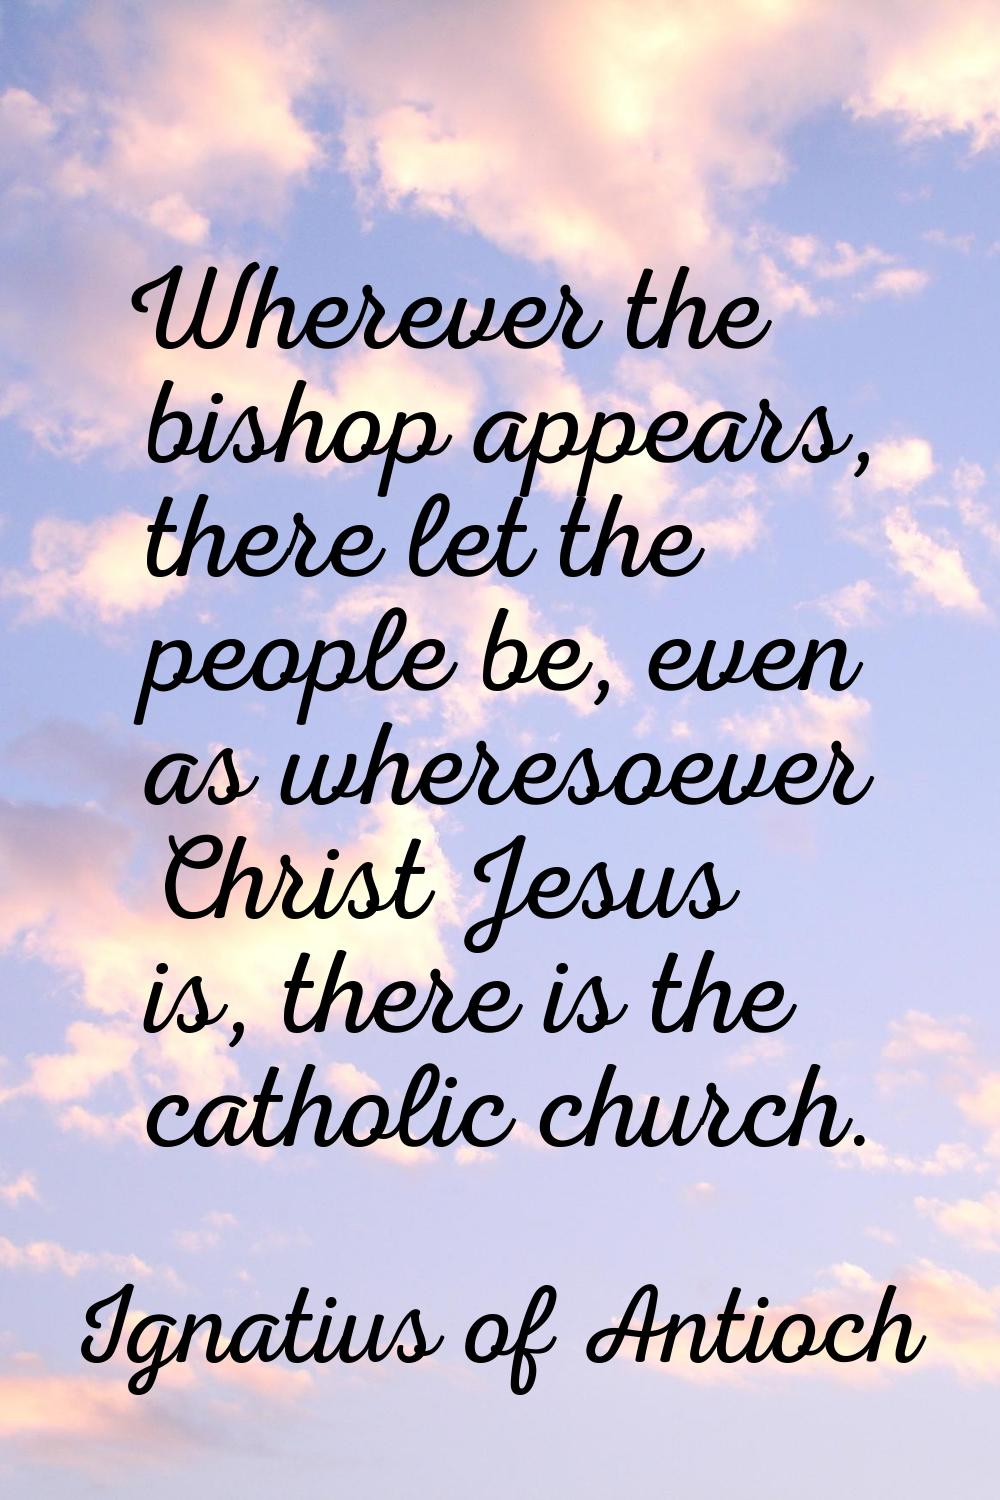 Wherever the bishop appears, there let the people be, even as wheresoever Christ Jesus is, there is